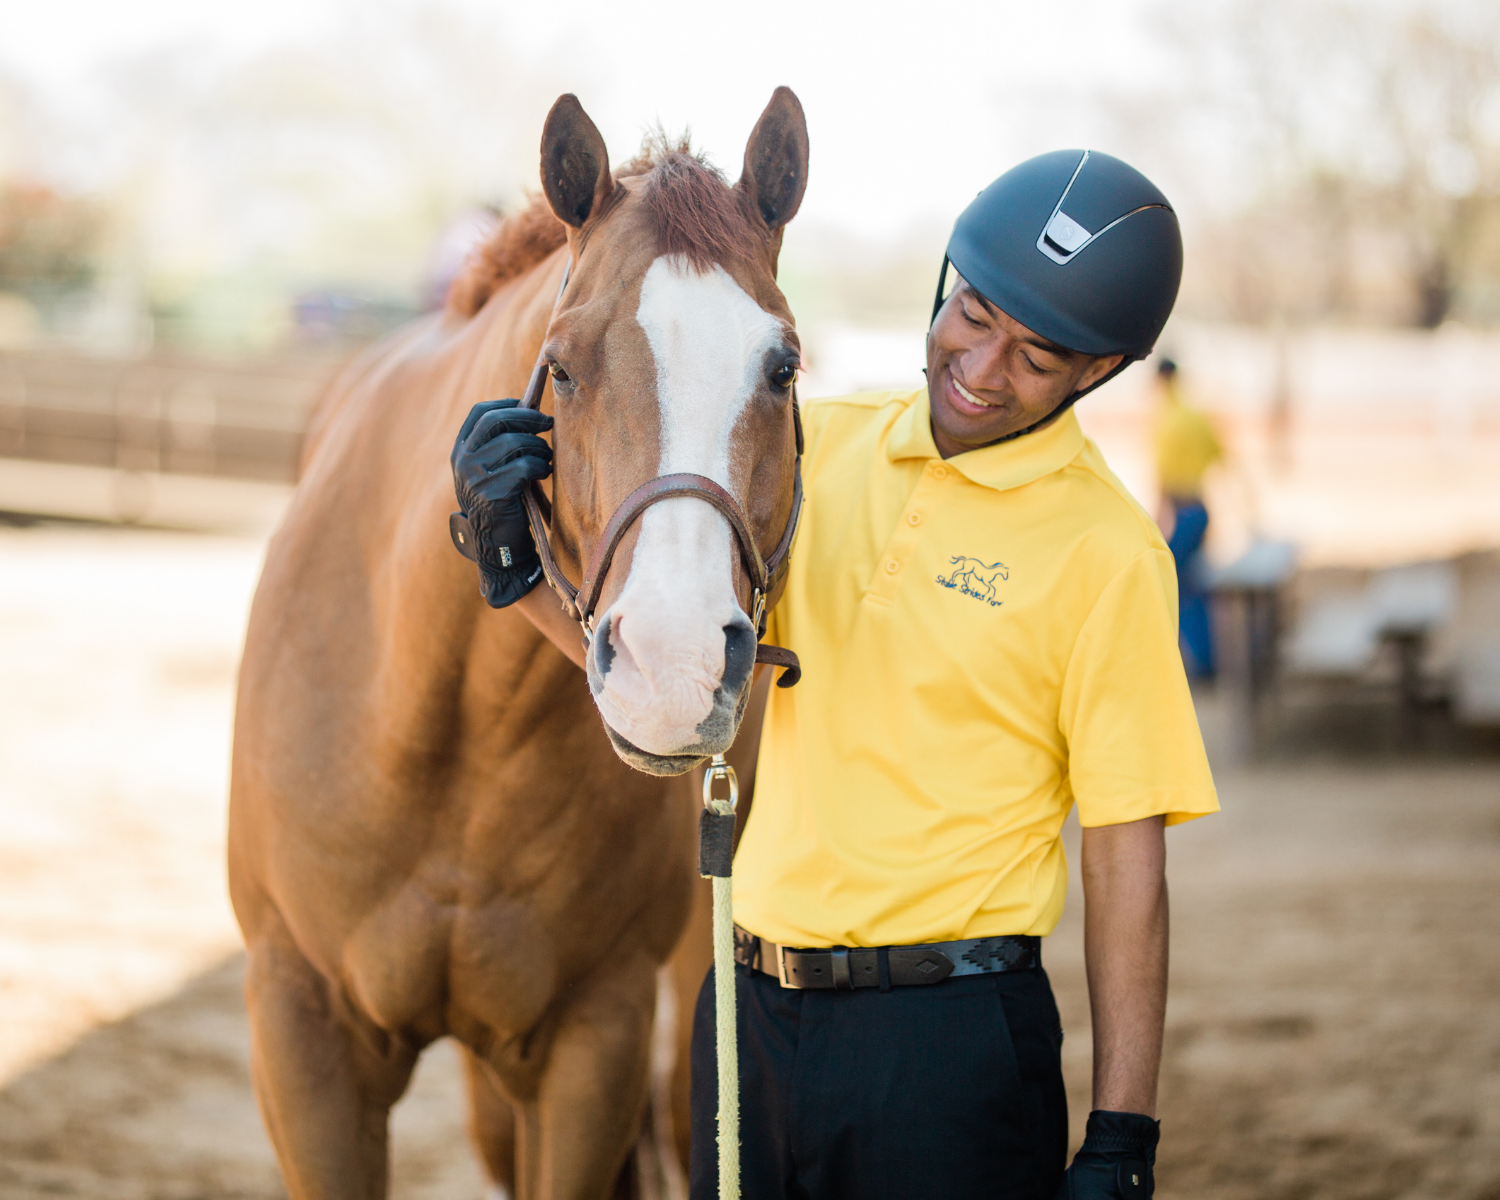 Equestrians With Disabilities rider, Spencer Roberson, pets his horse during a demonstration at the 2019 Coaches Summit.